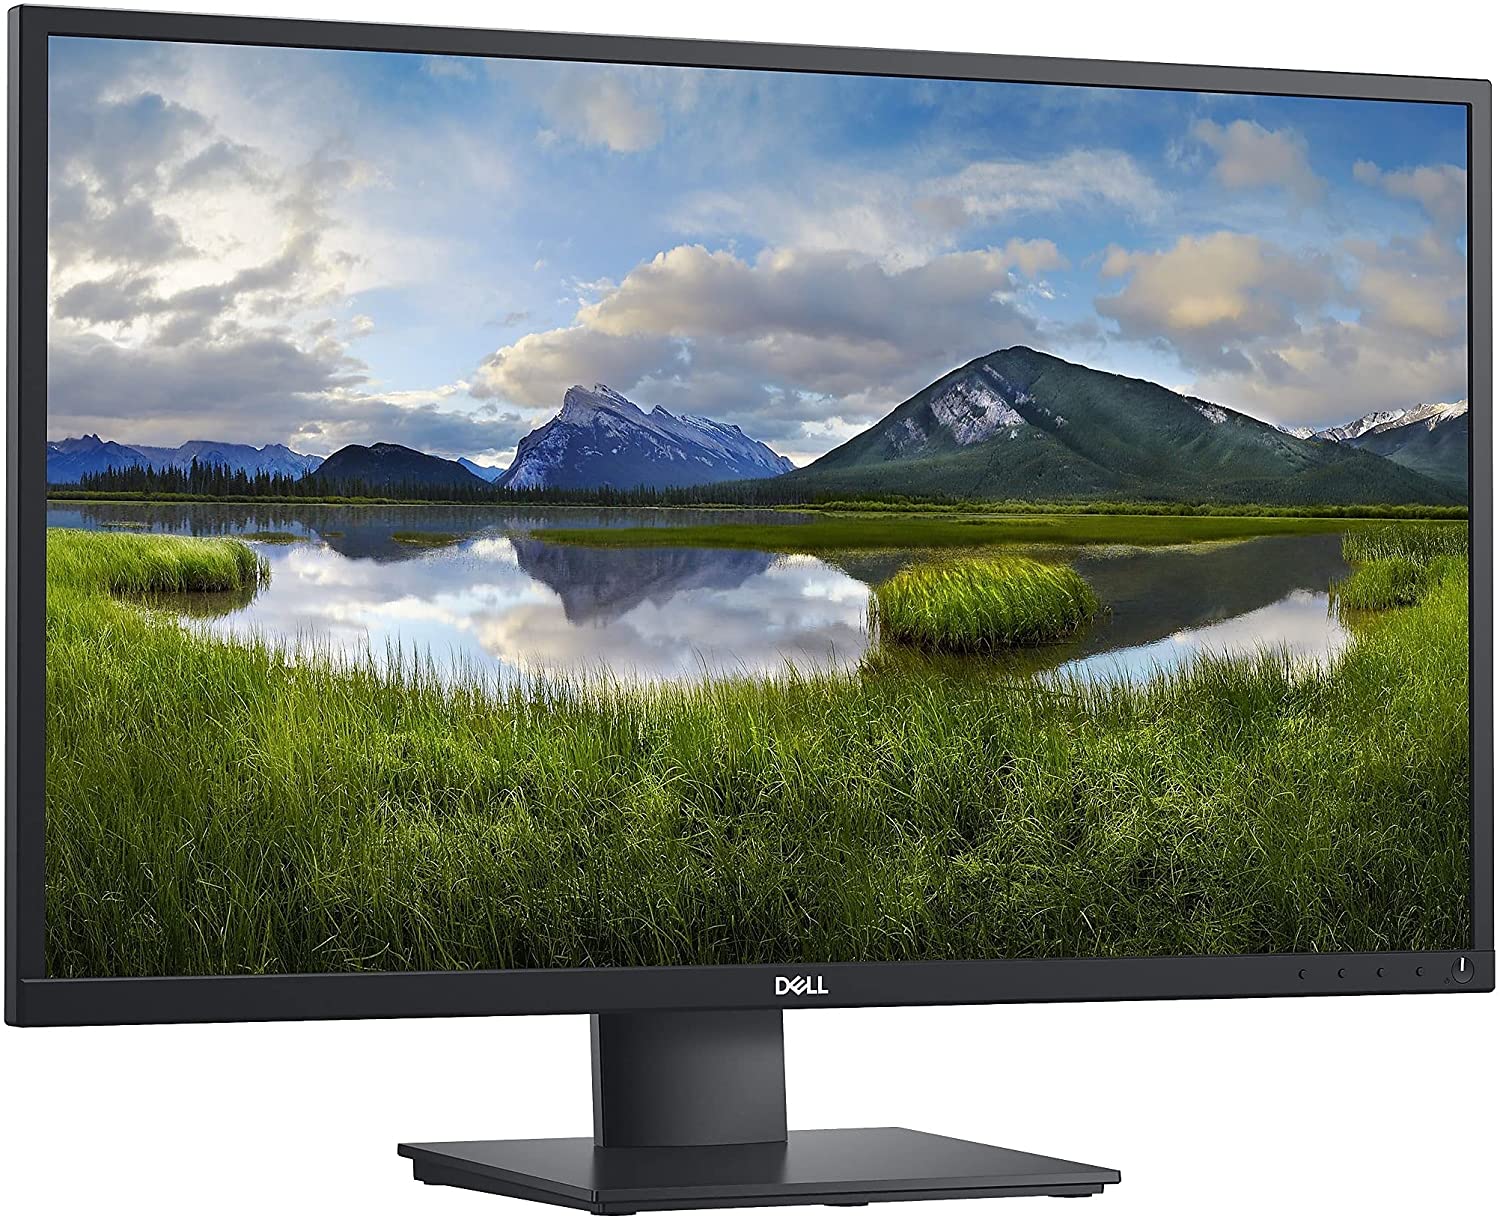 Dell E2720HS 27" LCD Anti-Glare Monitor - 1920 x 1080 Full HD Display - 60 Hz Refresh Rate - VGA & HDMI Input Connectors - LED Backlight Technology - in-Plane Switching Technology